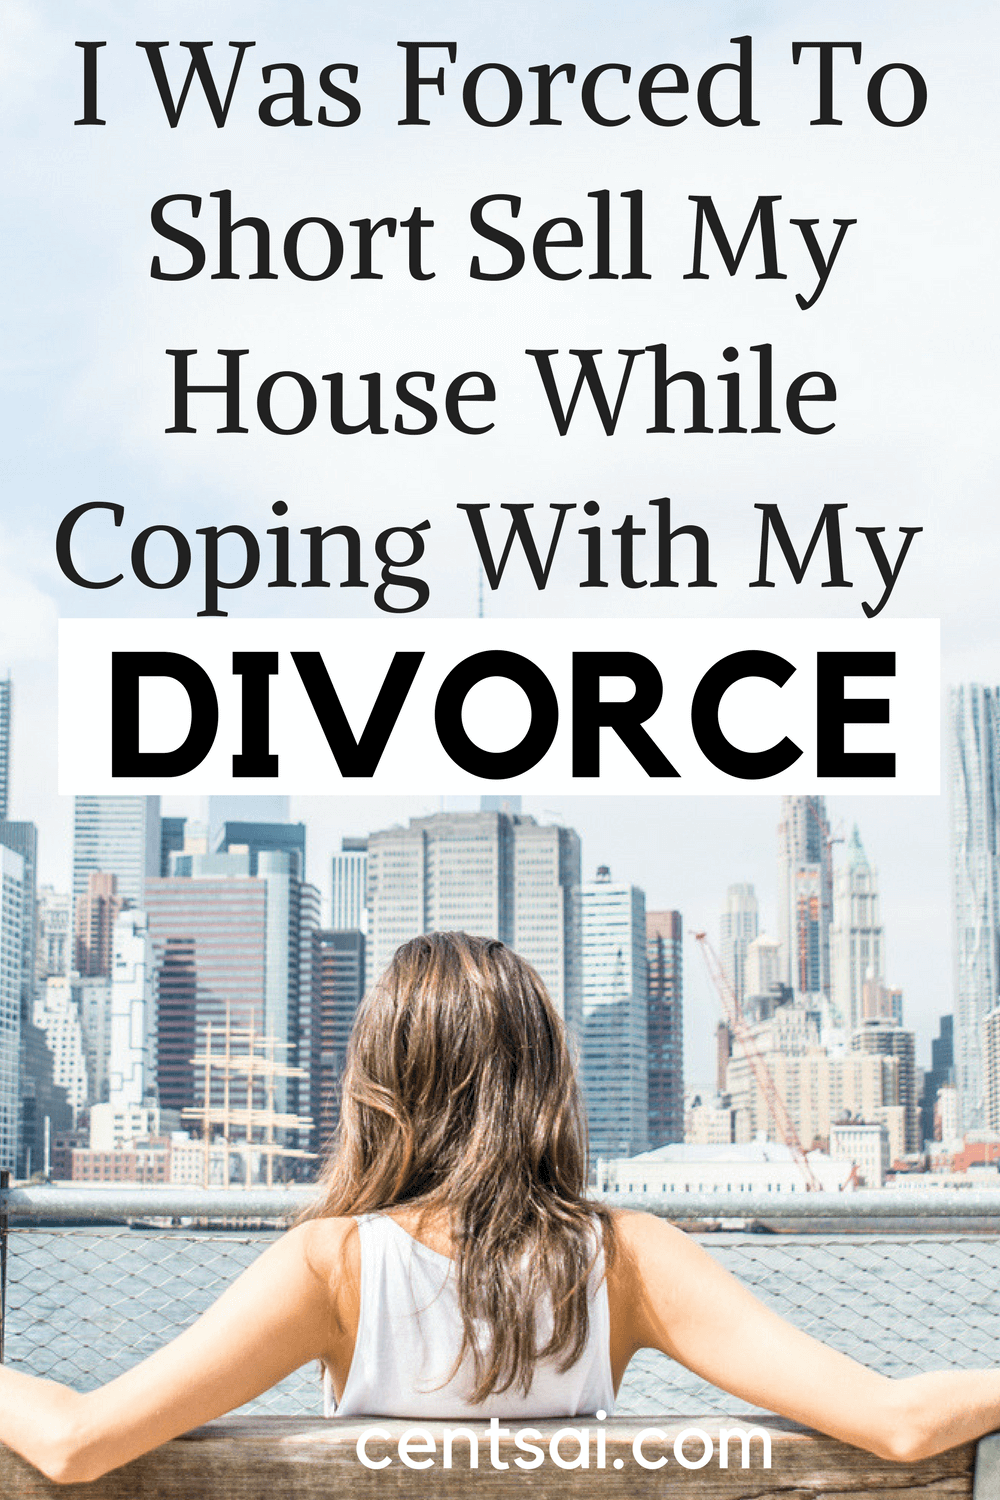 I Was Forced To Short Sell My House While Coping With My Divorce